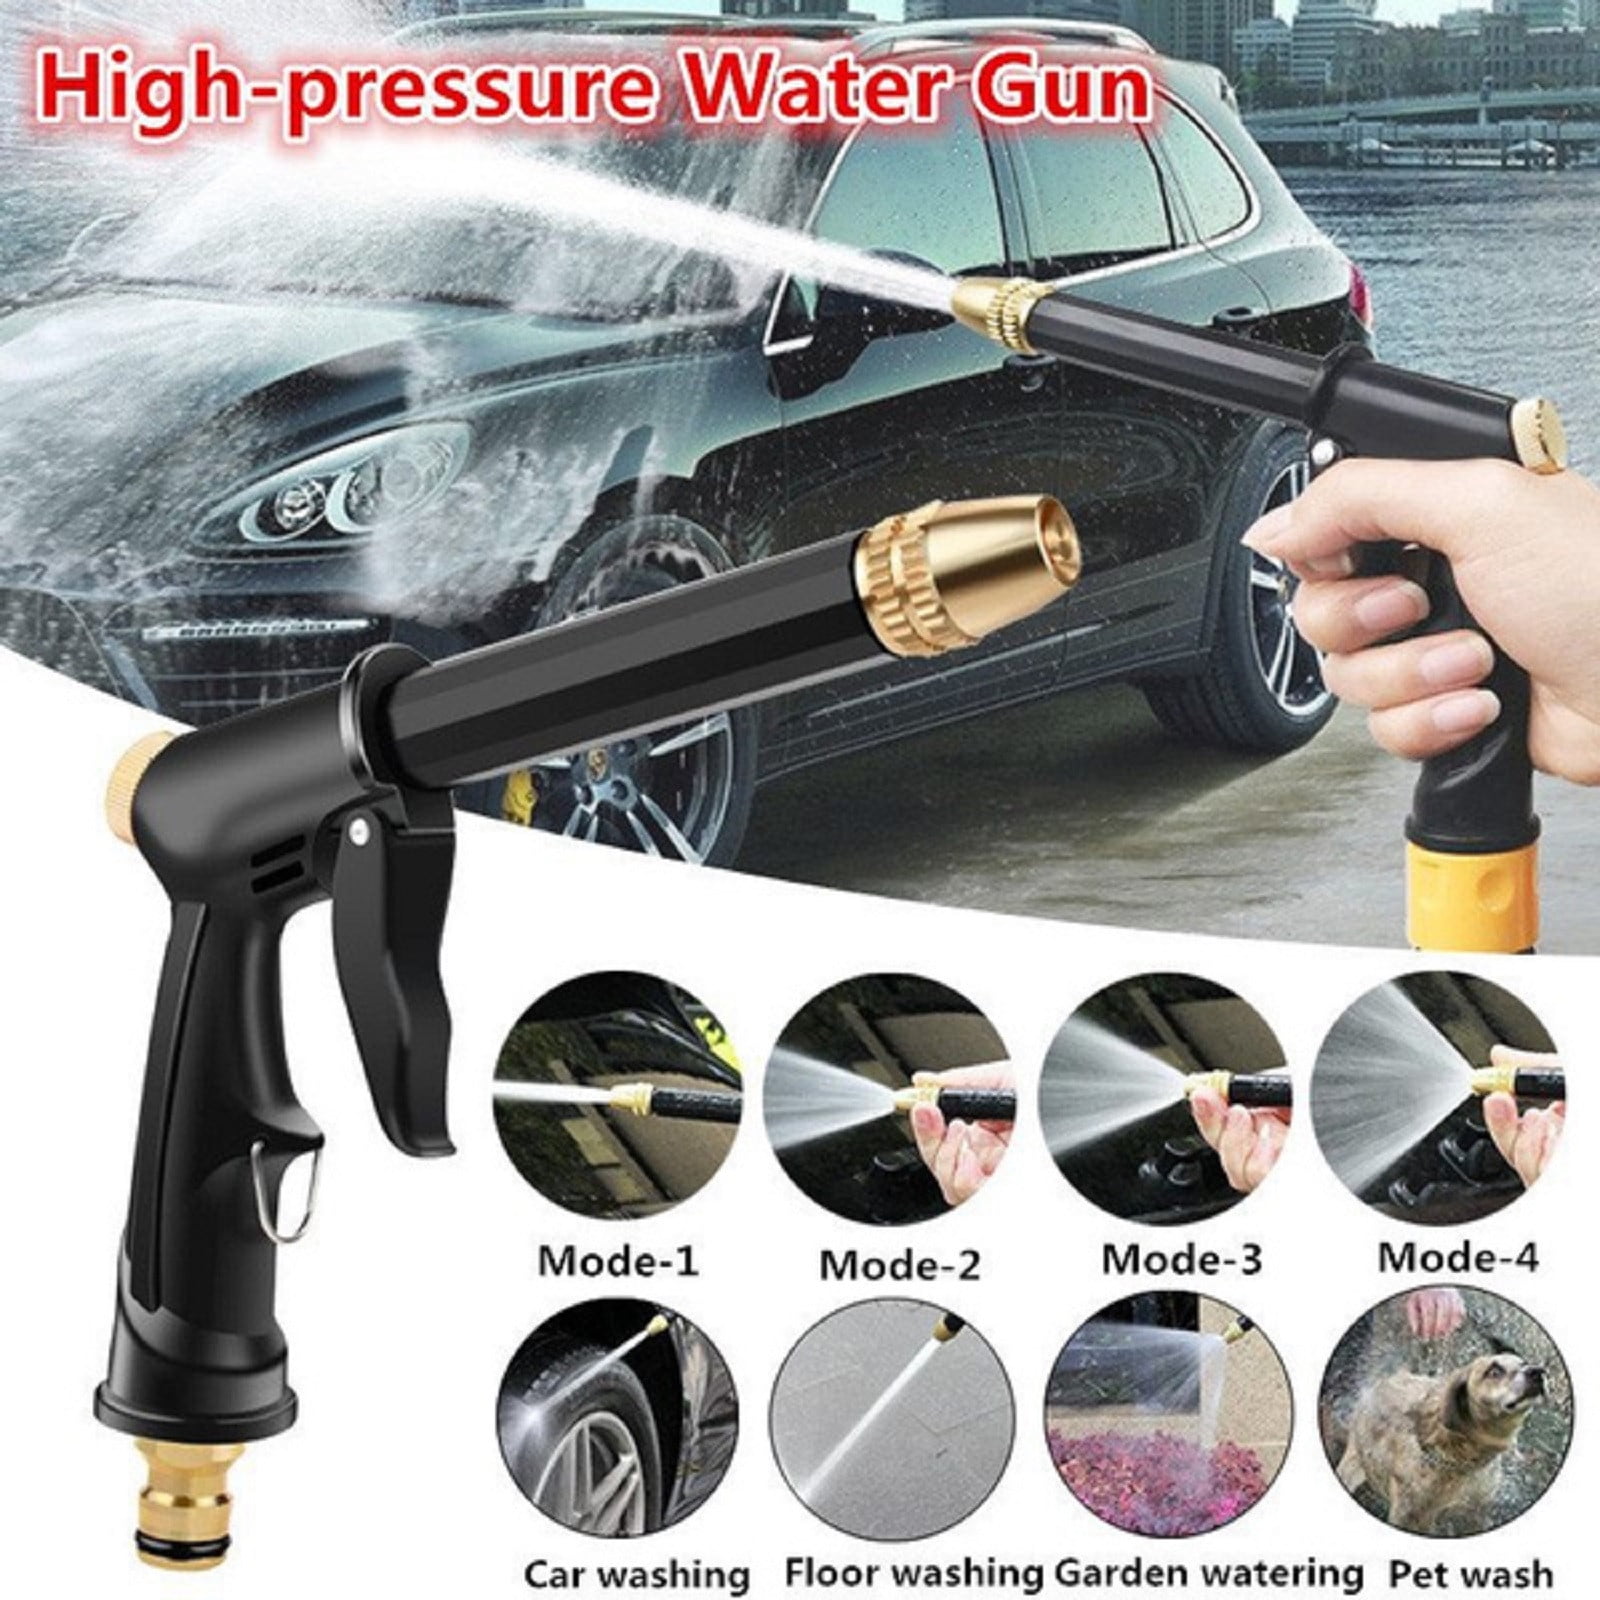 Gray Color Heavy Duty Metal in Zinc Alloy Body with Full Brass Nozzle & ABS Plastic with Rubber Coating High Pressure Metal Water Spray Gun,Best for Watering,Washing HOMY Garden Hose Nozzle 